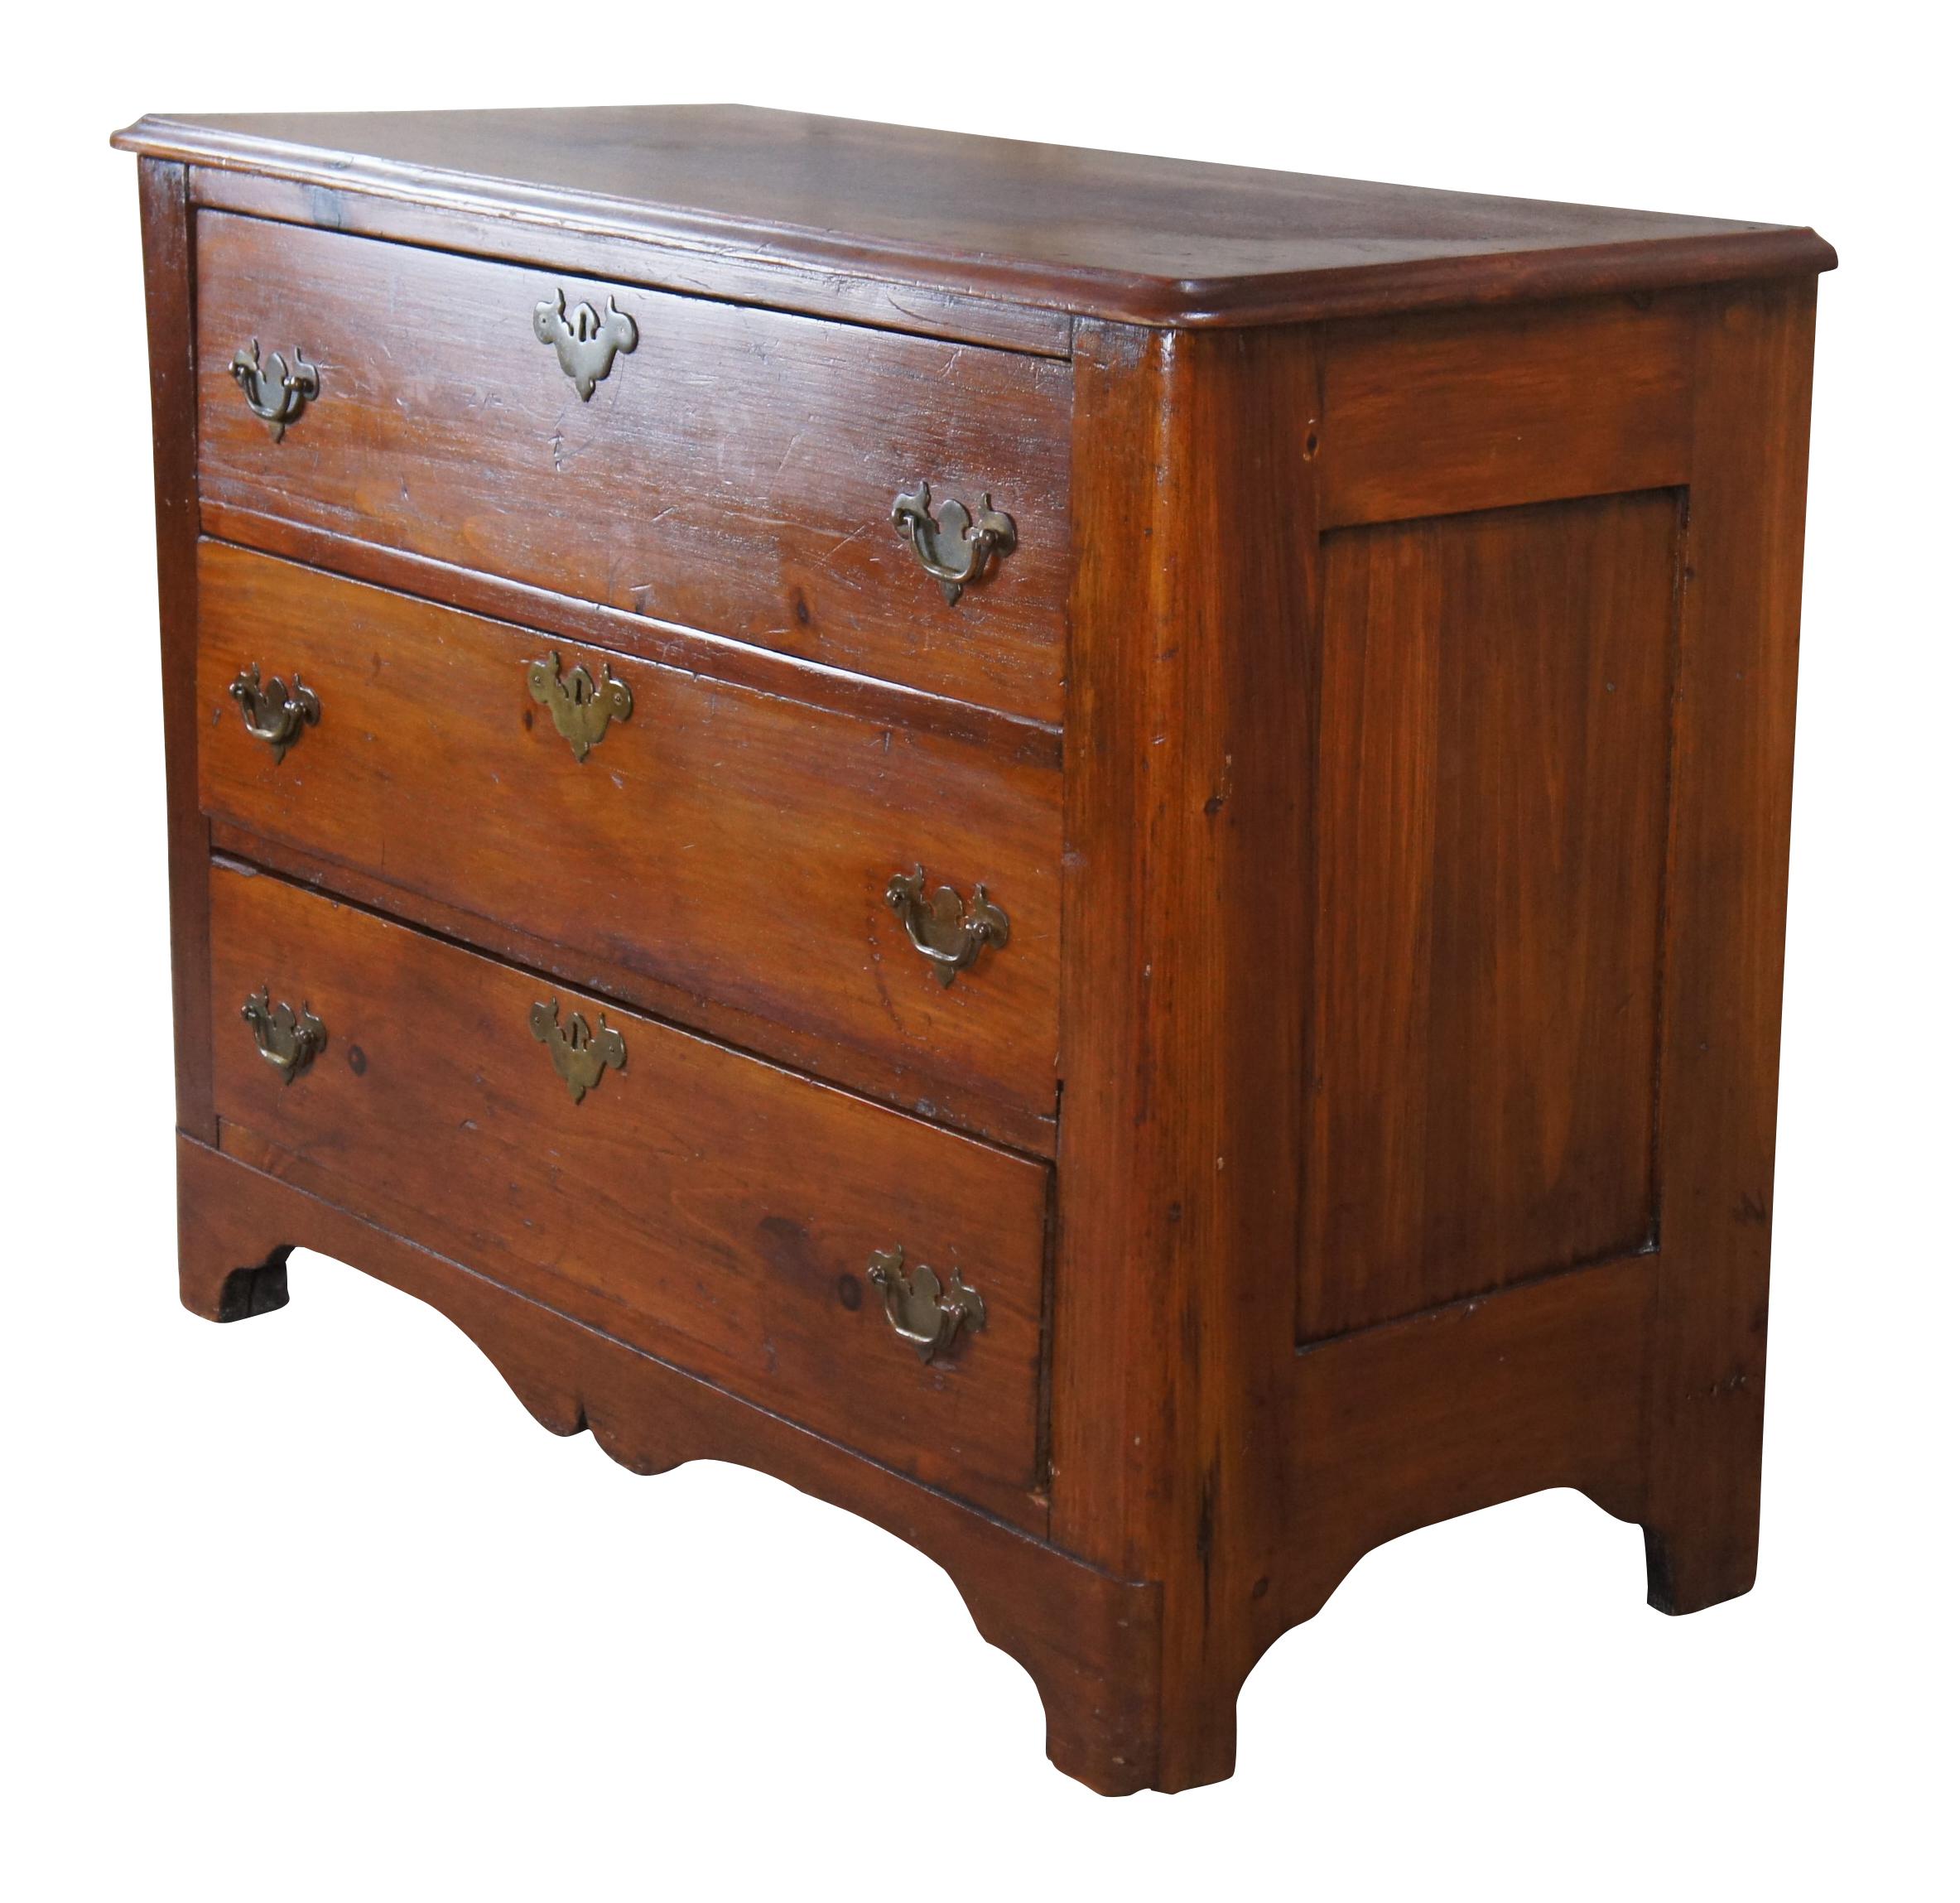 Antique Early American style chest of drawers or dresser, circa 1900s. Made of pine featuring three drawers with colonial brass bat wing hardware and serpentine apron.